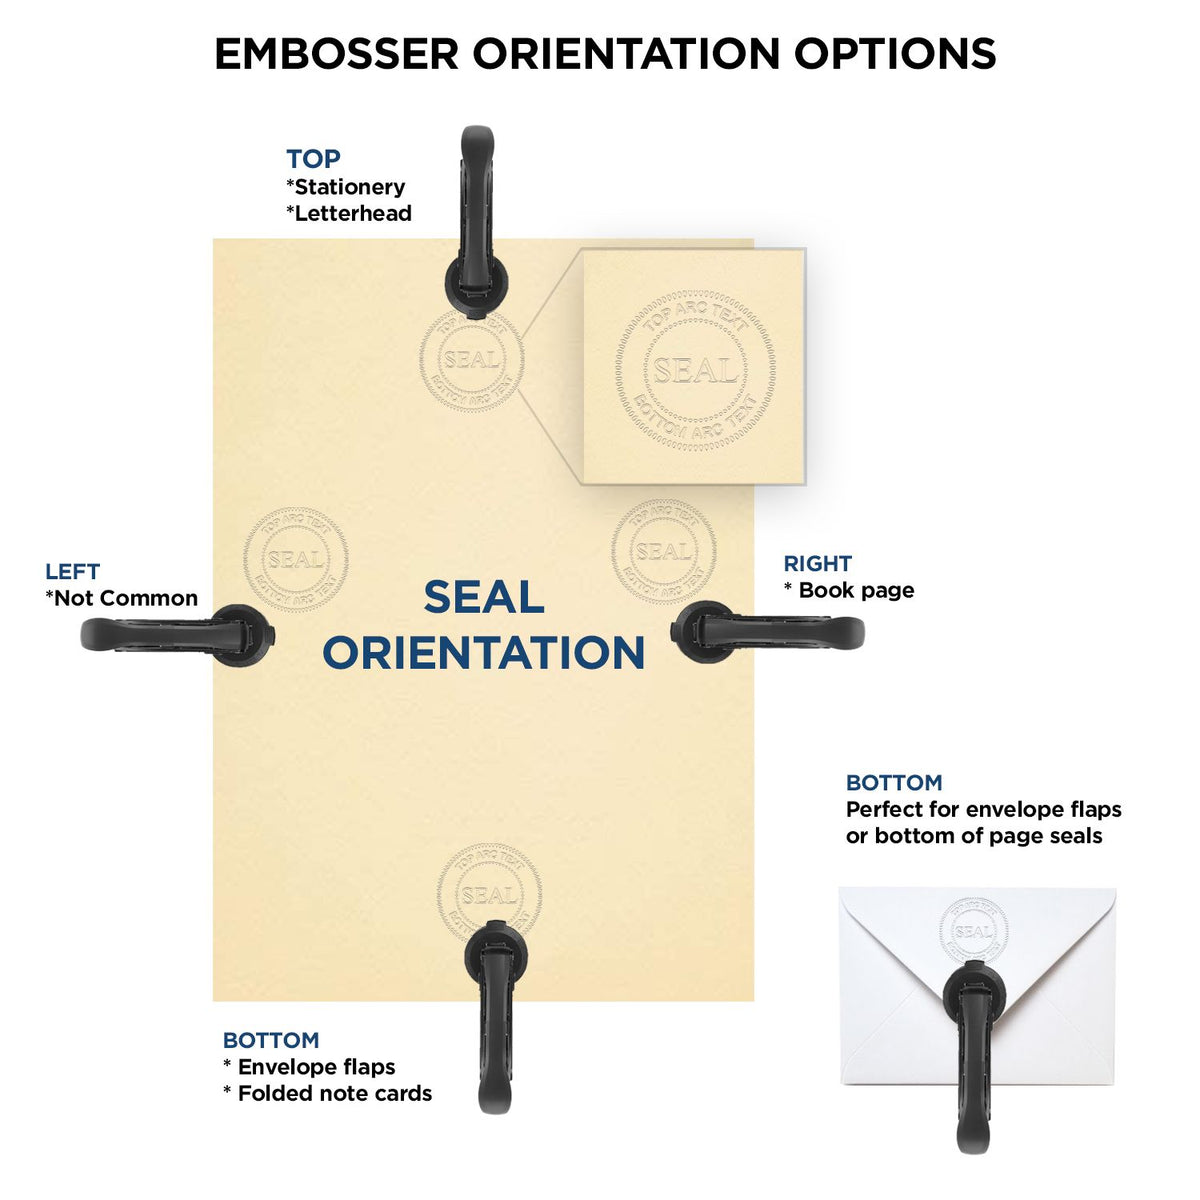 An infographic for the Hybrid Pennsylvania Land Surveyor Seal showing embosser orientation, this is showing examples of a top, bottom, right and left insert.